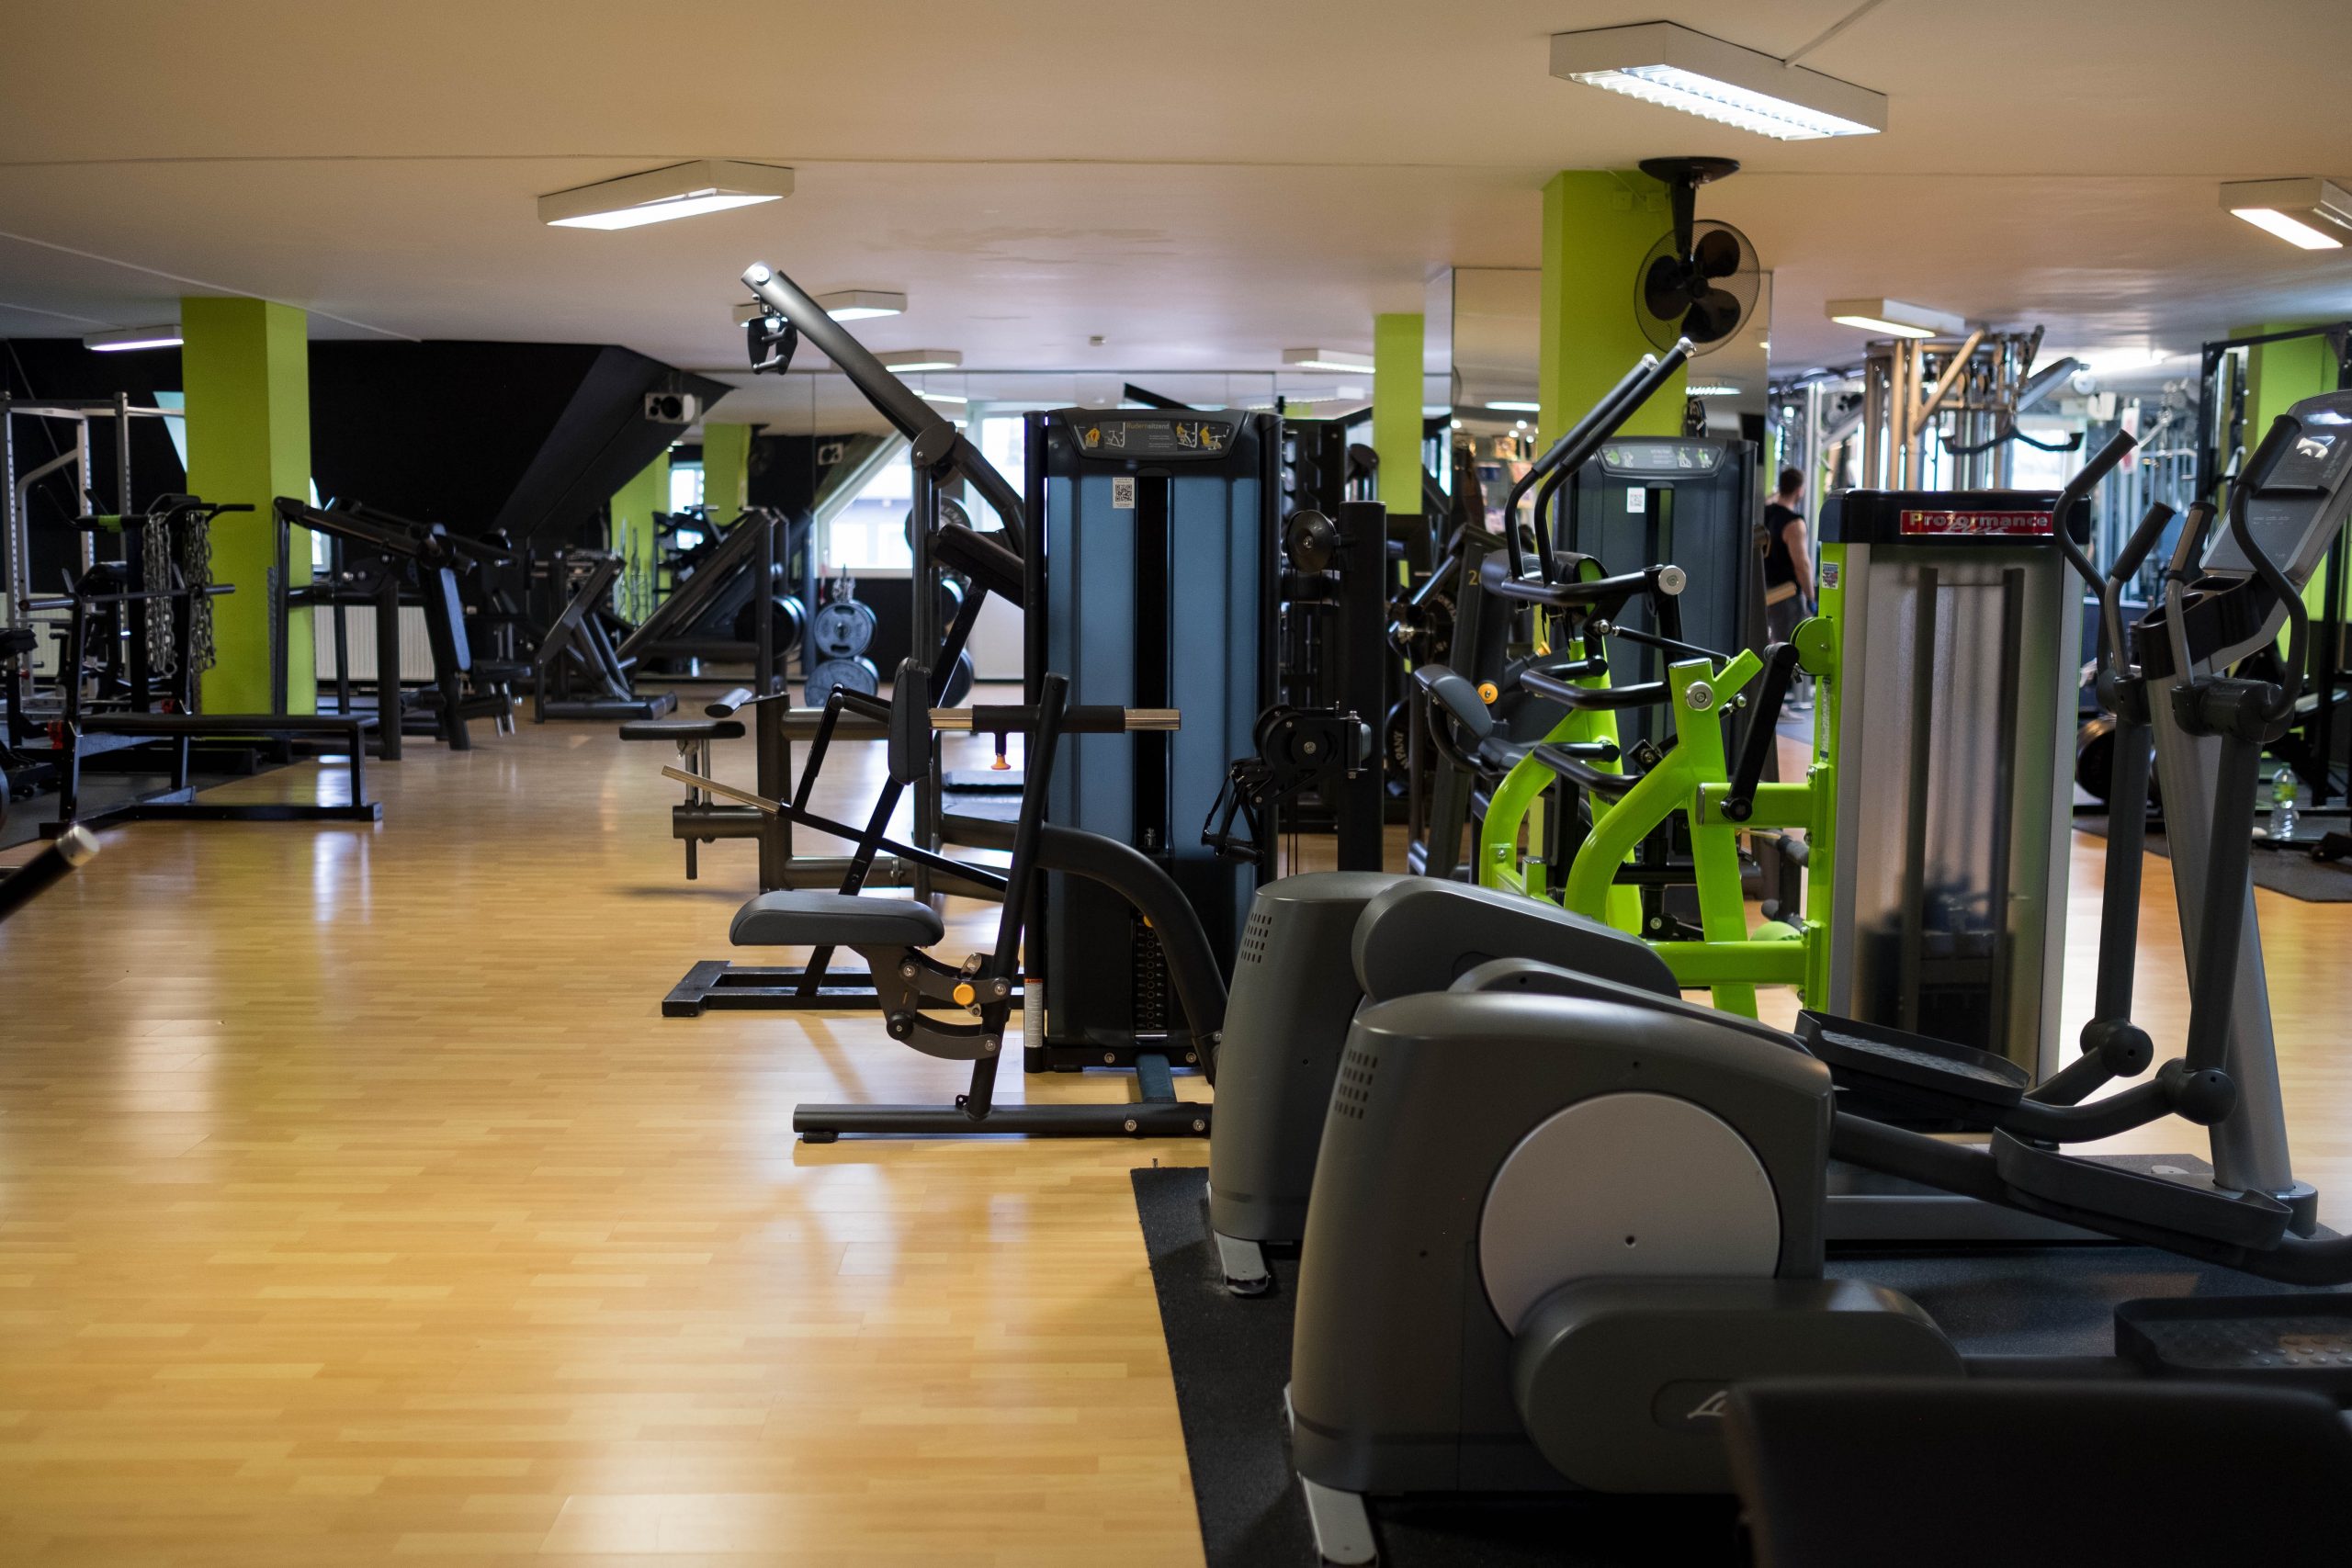 A school gym including cross trainers and weight training equipment